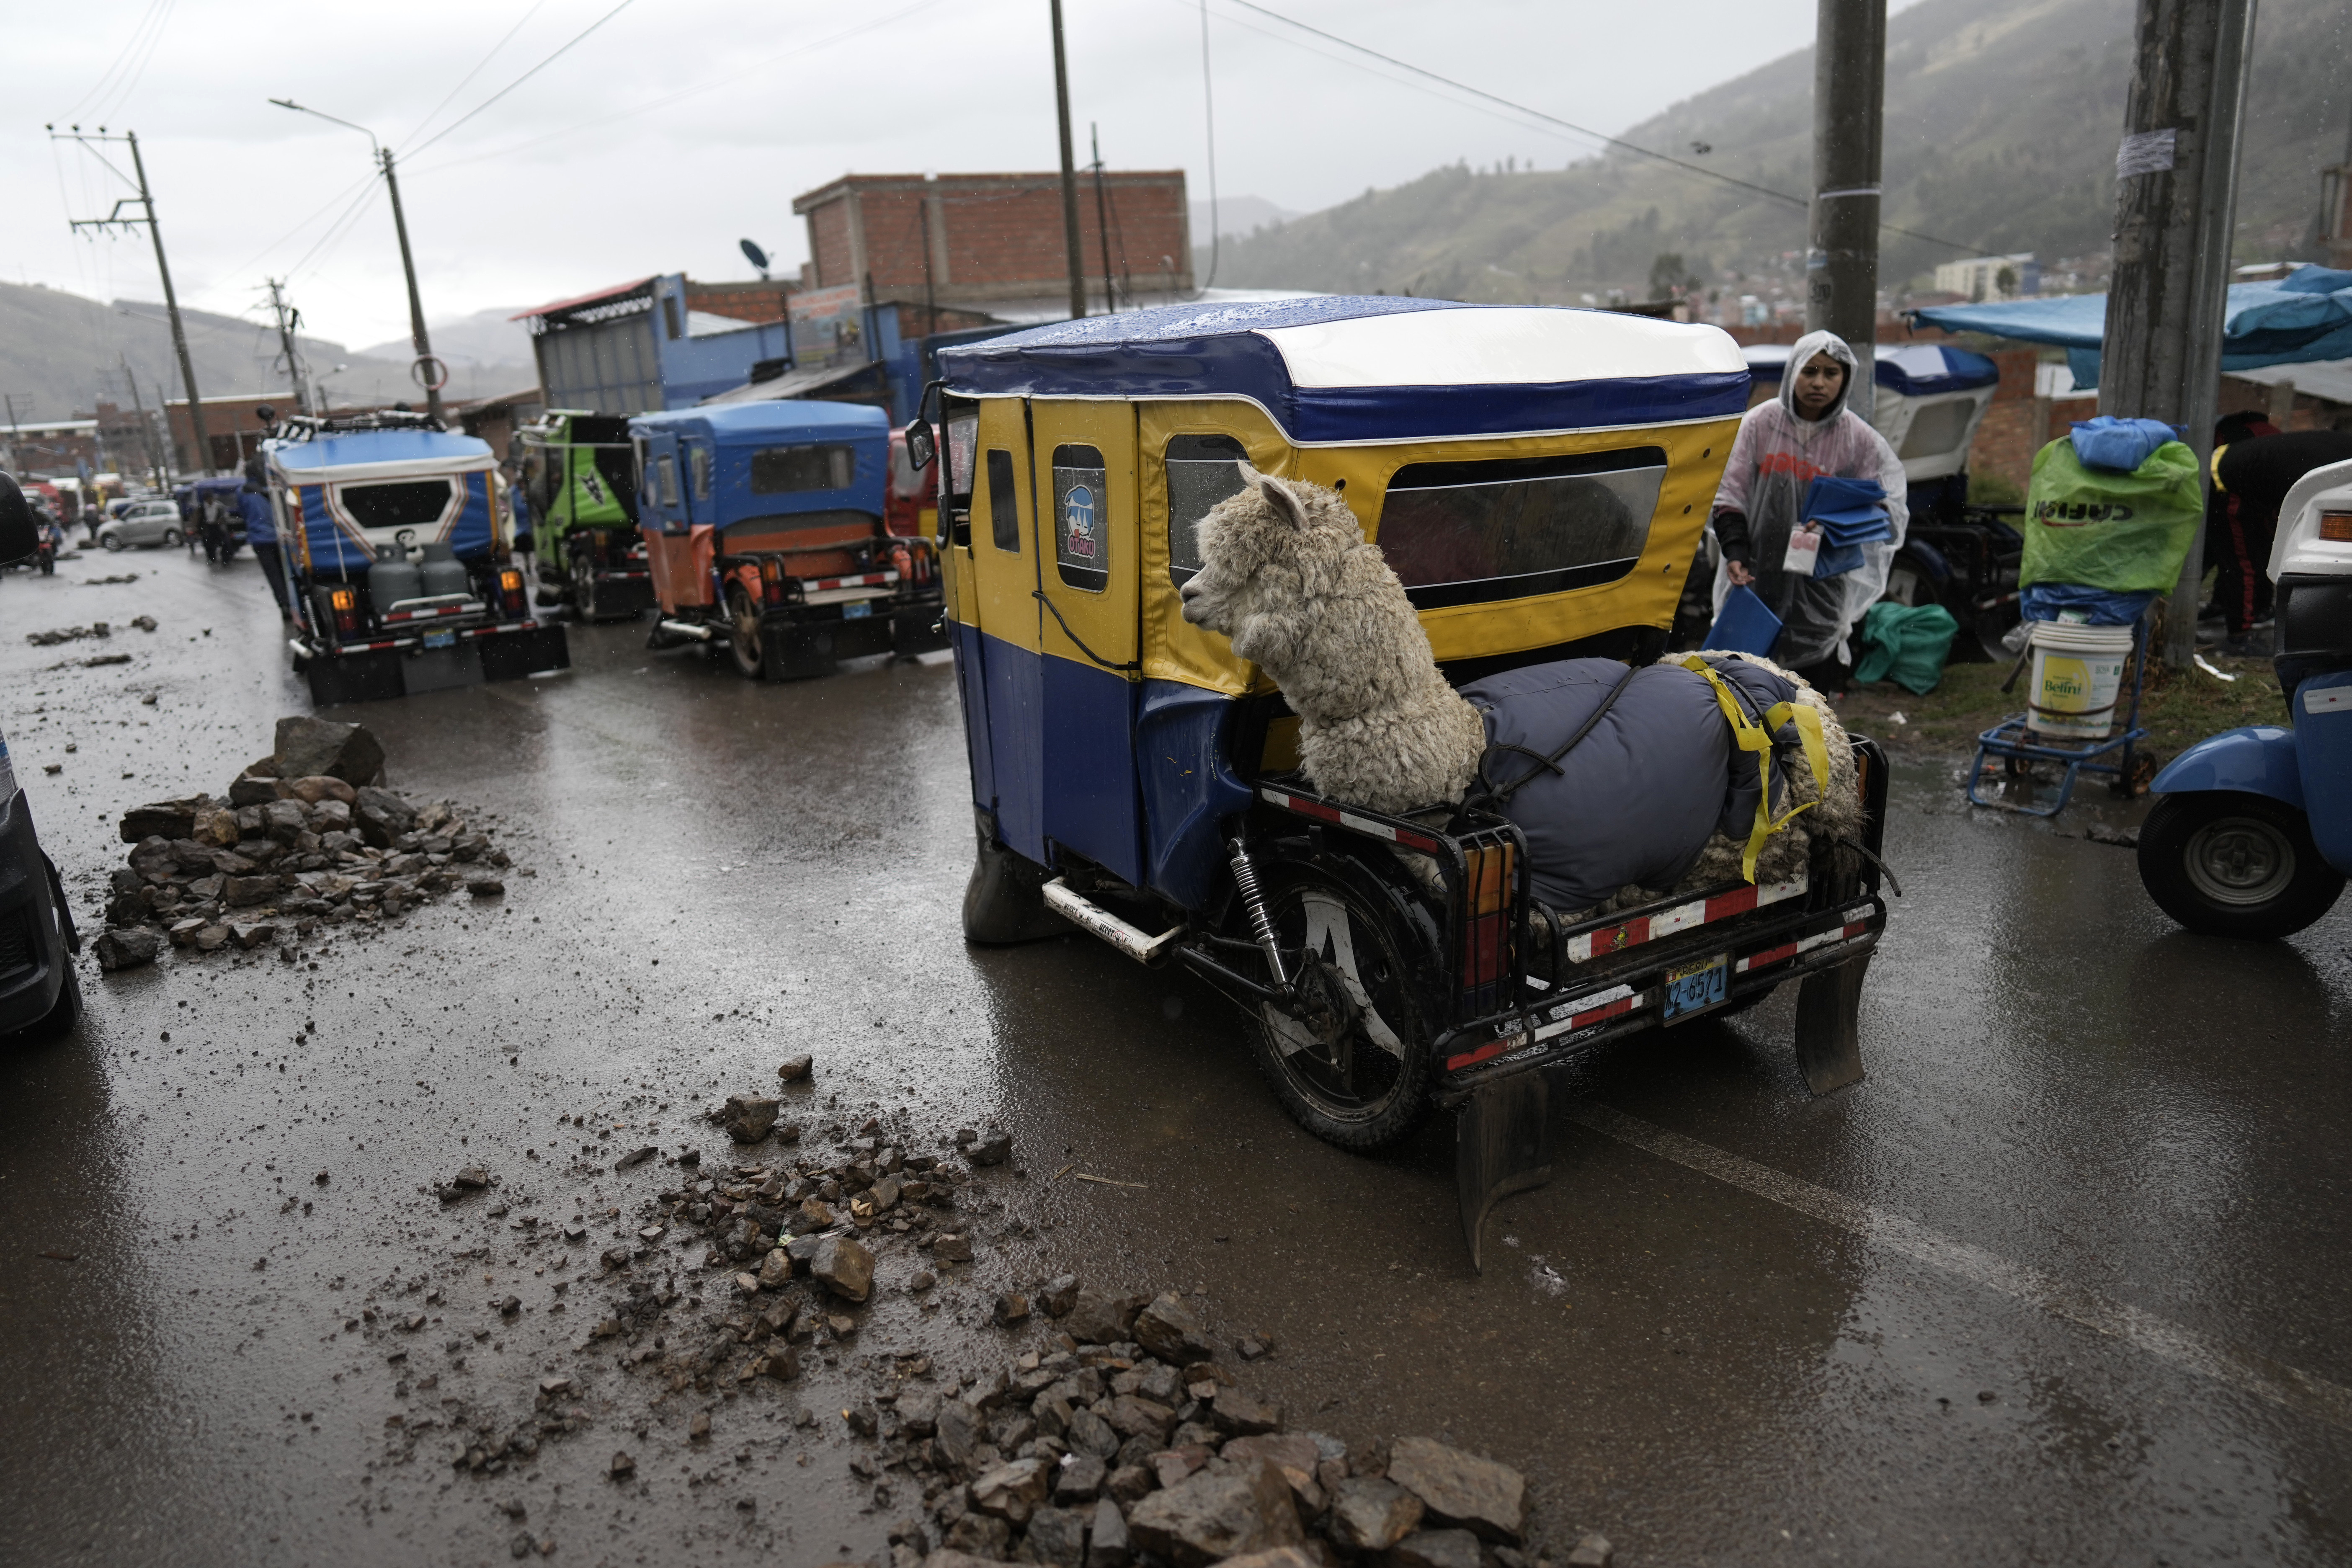 A llama is carried on the back of a mototaxi by a road blockade installed by supporters of former President Pedro Castillo, in Sicuani, Peru, on January 28, 2023. President Dina Boluarte has become the main target of the protesters, whose clashes with the police have resulted in more than 50 deaths.  (AP Photo/Rodrigo Abd)